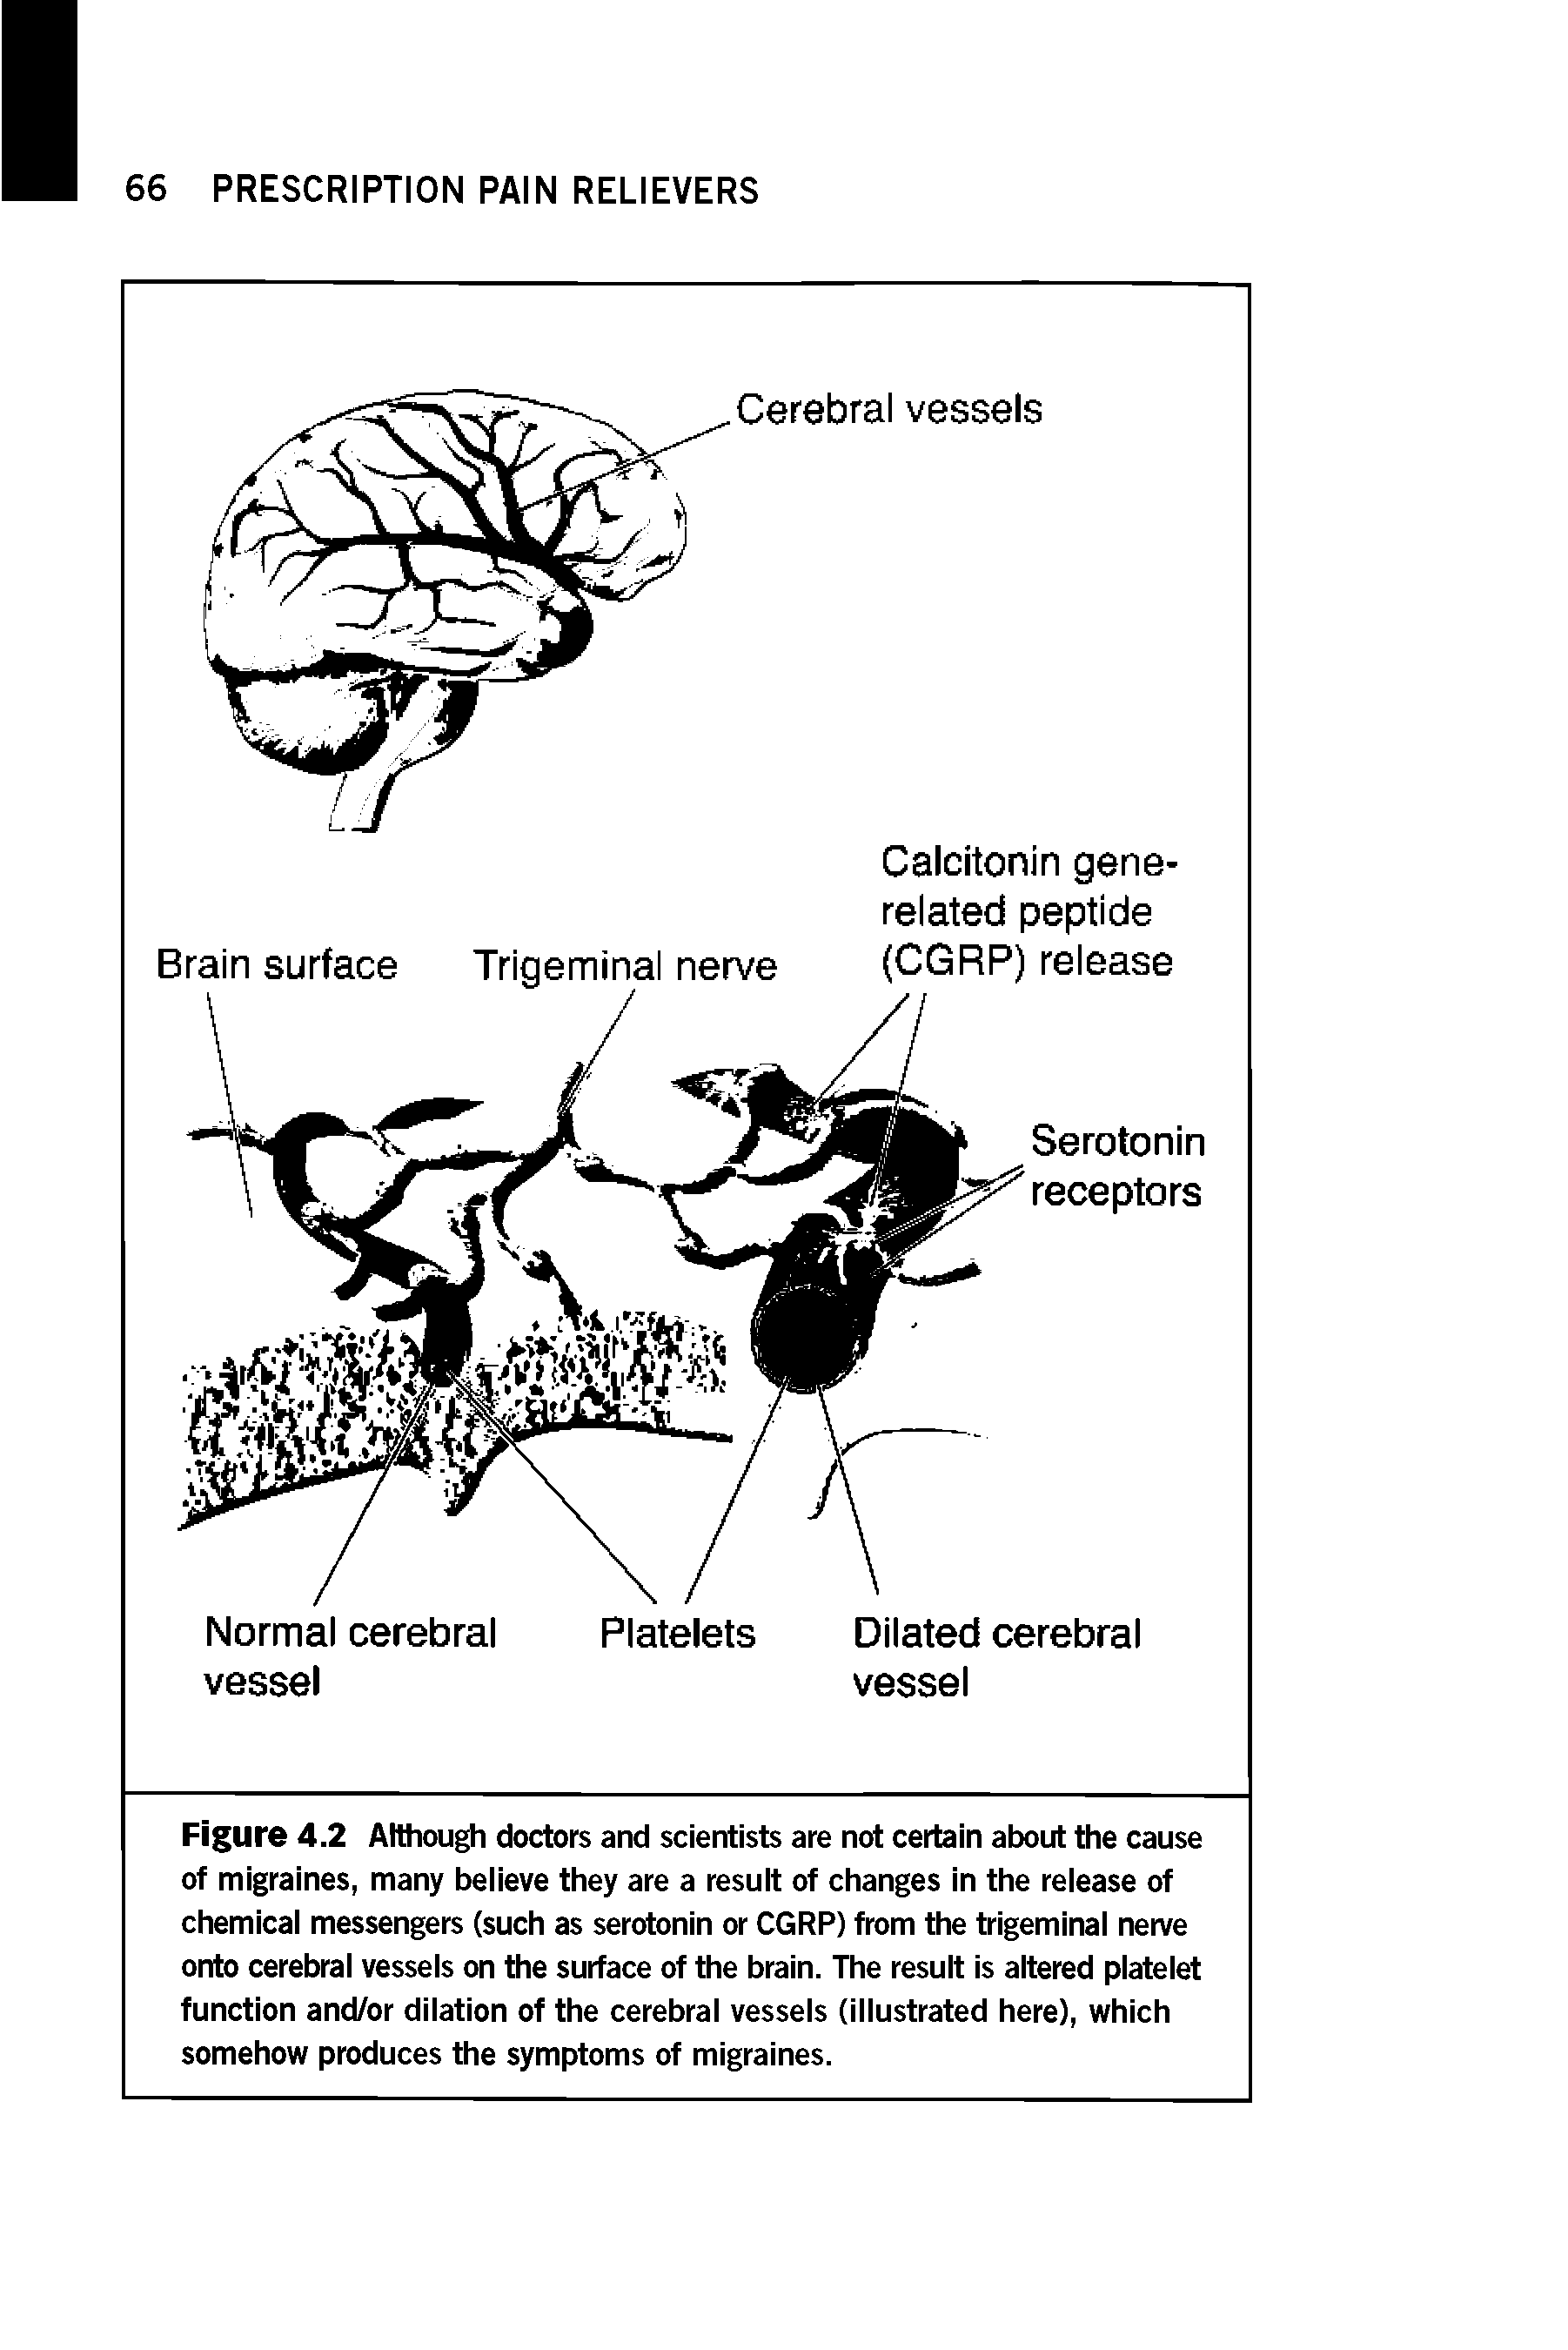 Figure 4.2 Although doctors and scientists are not certain about the cause of migraines, many believe they are a result of changes in the release of chemical messengers (such as serotonin or CGRP) from the trigeminal nerve onto cerebral vessels on the surface of the brain. The result is altered platelet function and/or dilation of the cerebral vessels (illustrated here), which somehow produces the symptoms of migraines.